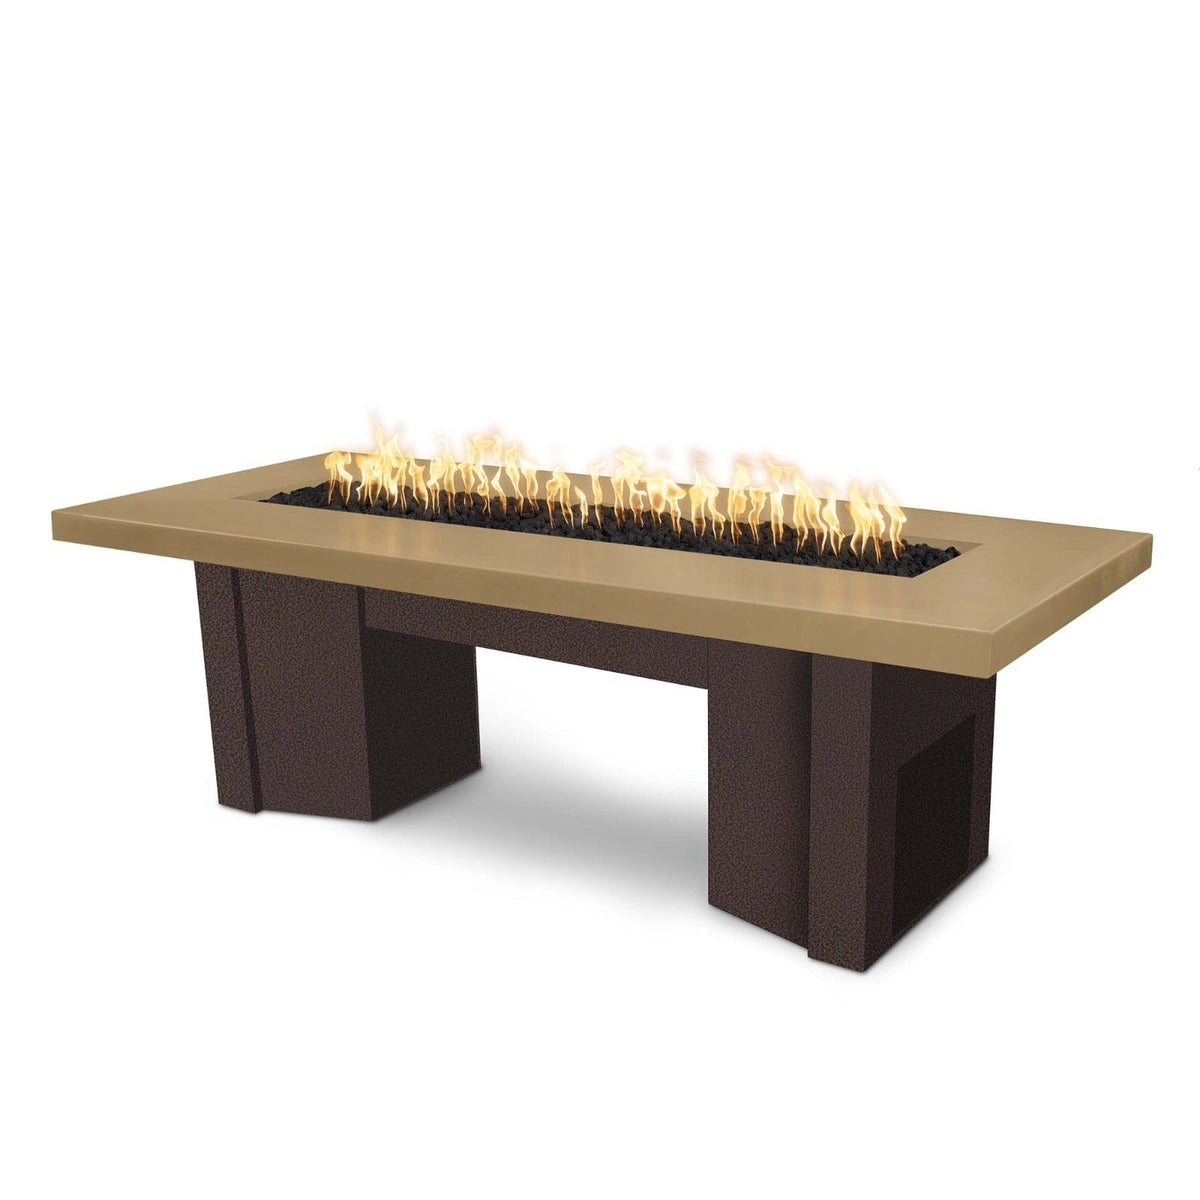 The Outdoor Plus Fire Features Brown (-BRN) / Copper Vein Powder Coated Steel (-CPV) The Outdoor Plus 78&quot; Alameda Fire Table Smooth Concrete in Liquid Propane - 110V Plug &amp; Play Electronic Ignition / OPT-ALMGFRC78EKIT-LP